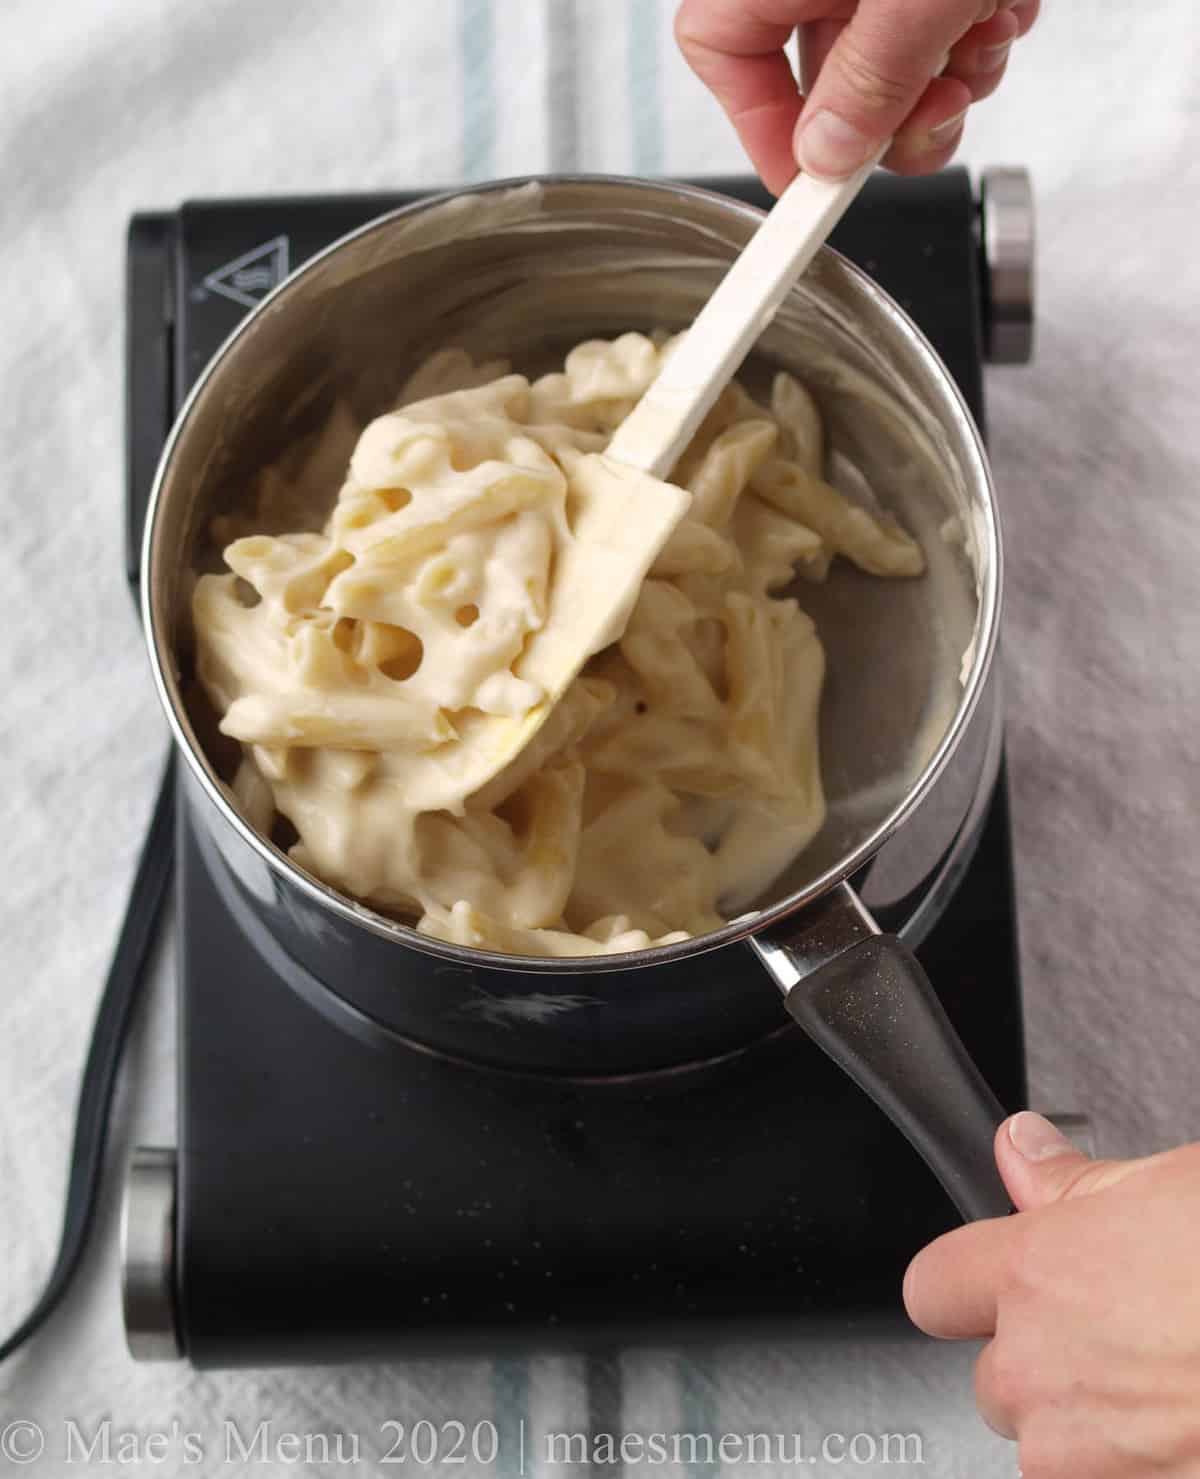 FOlding the pasta into the cheese sauce